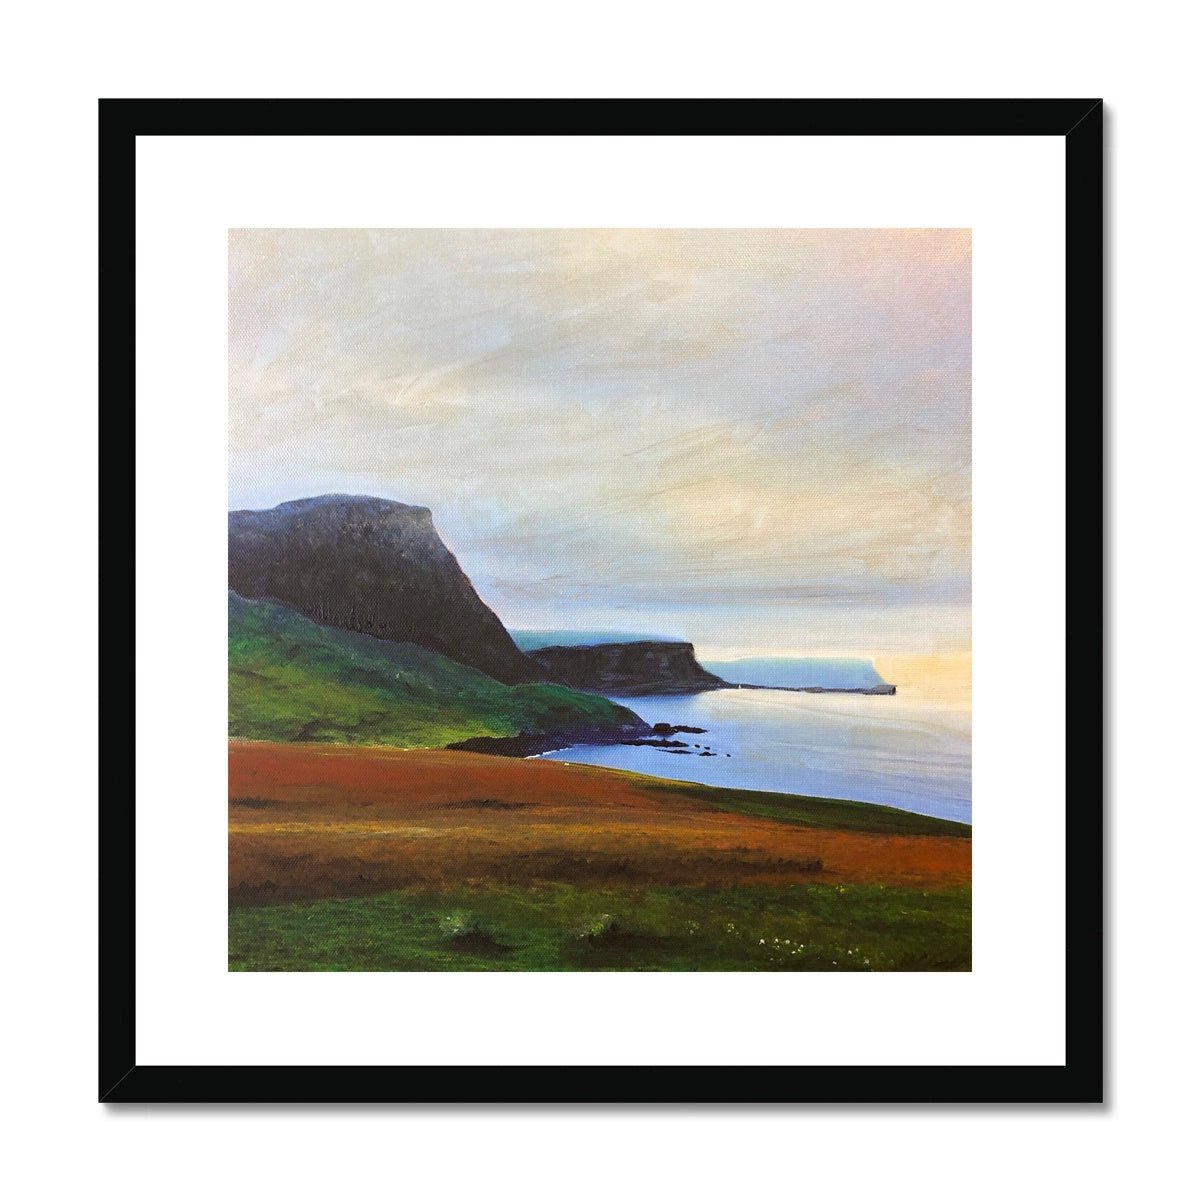 Neist Point Cliffs Skye Painting | Framed & Mounted Prints From Scotland-Framed & Mounted Prints-Skye Art Gallery-20"x20"-Black Frame-Paintings, Prints, Homeware, Art Gifts From Scotland By Scottish Artist Kevin Hunter